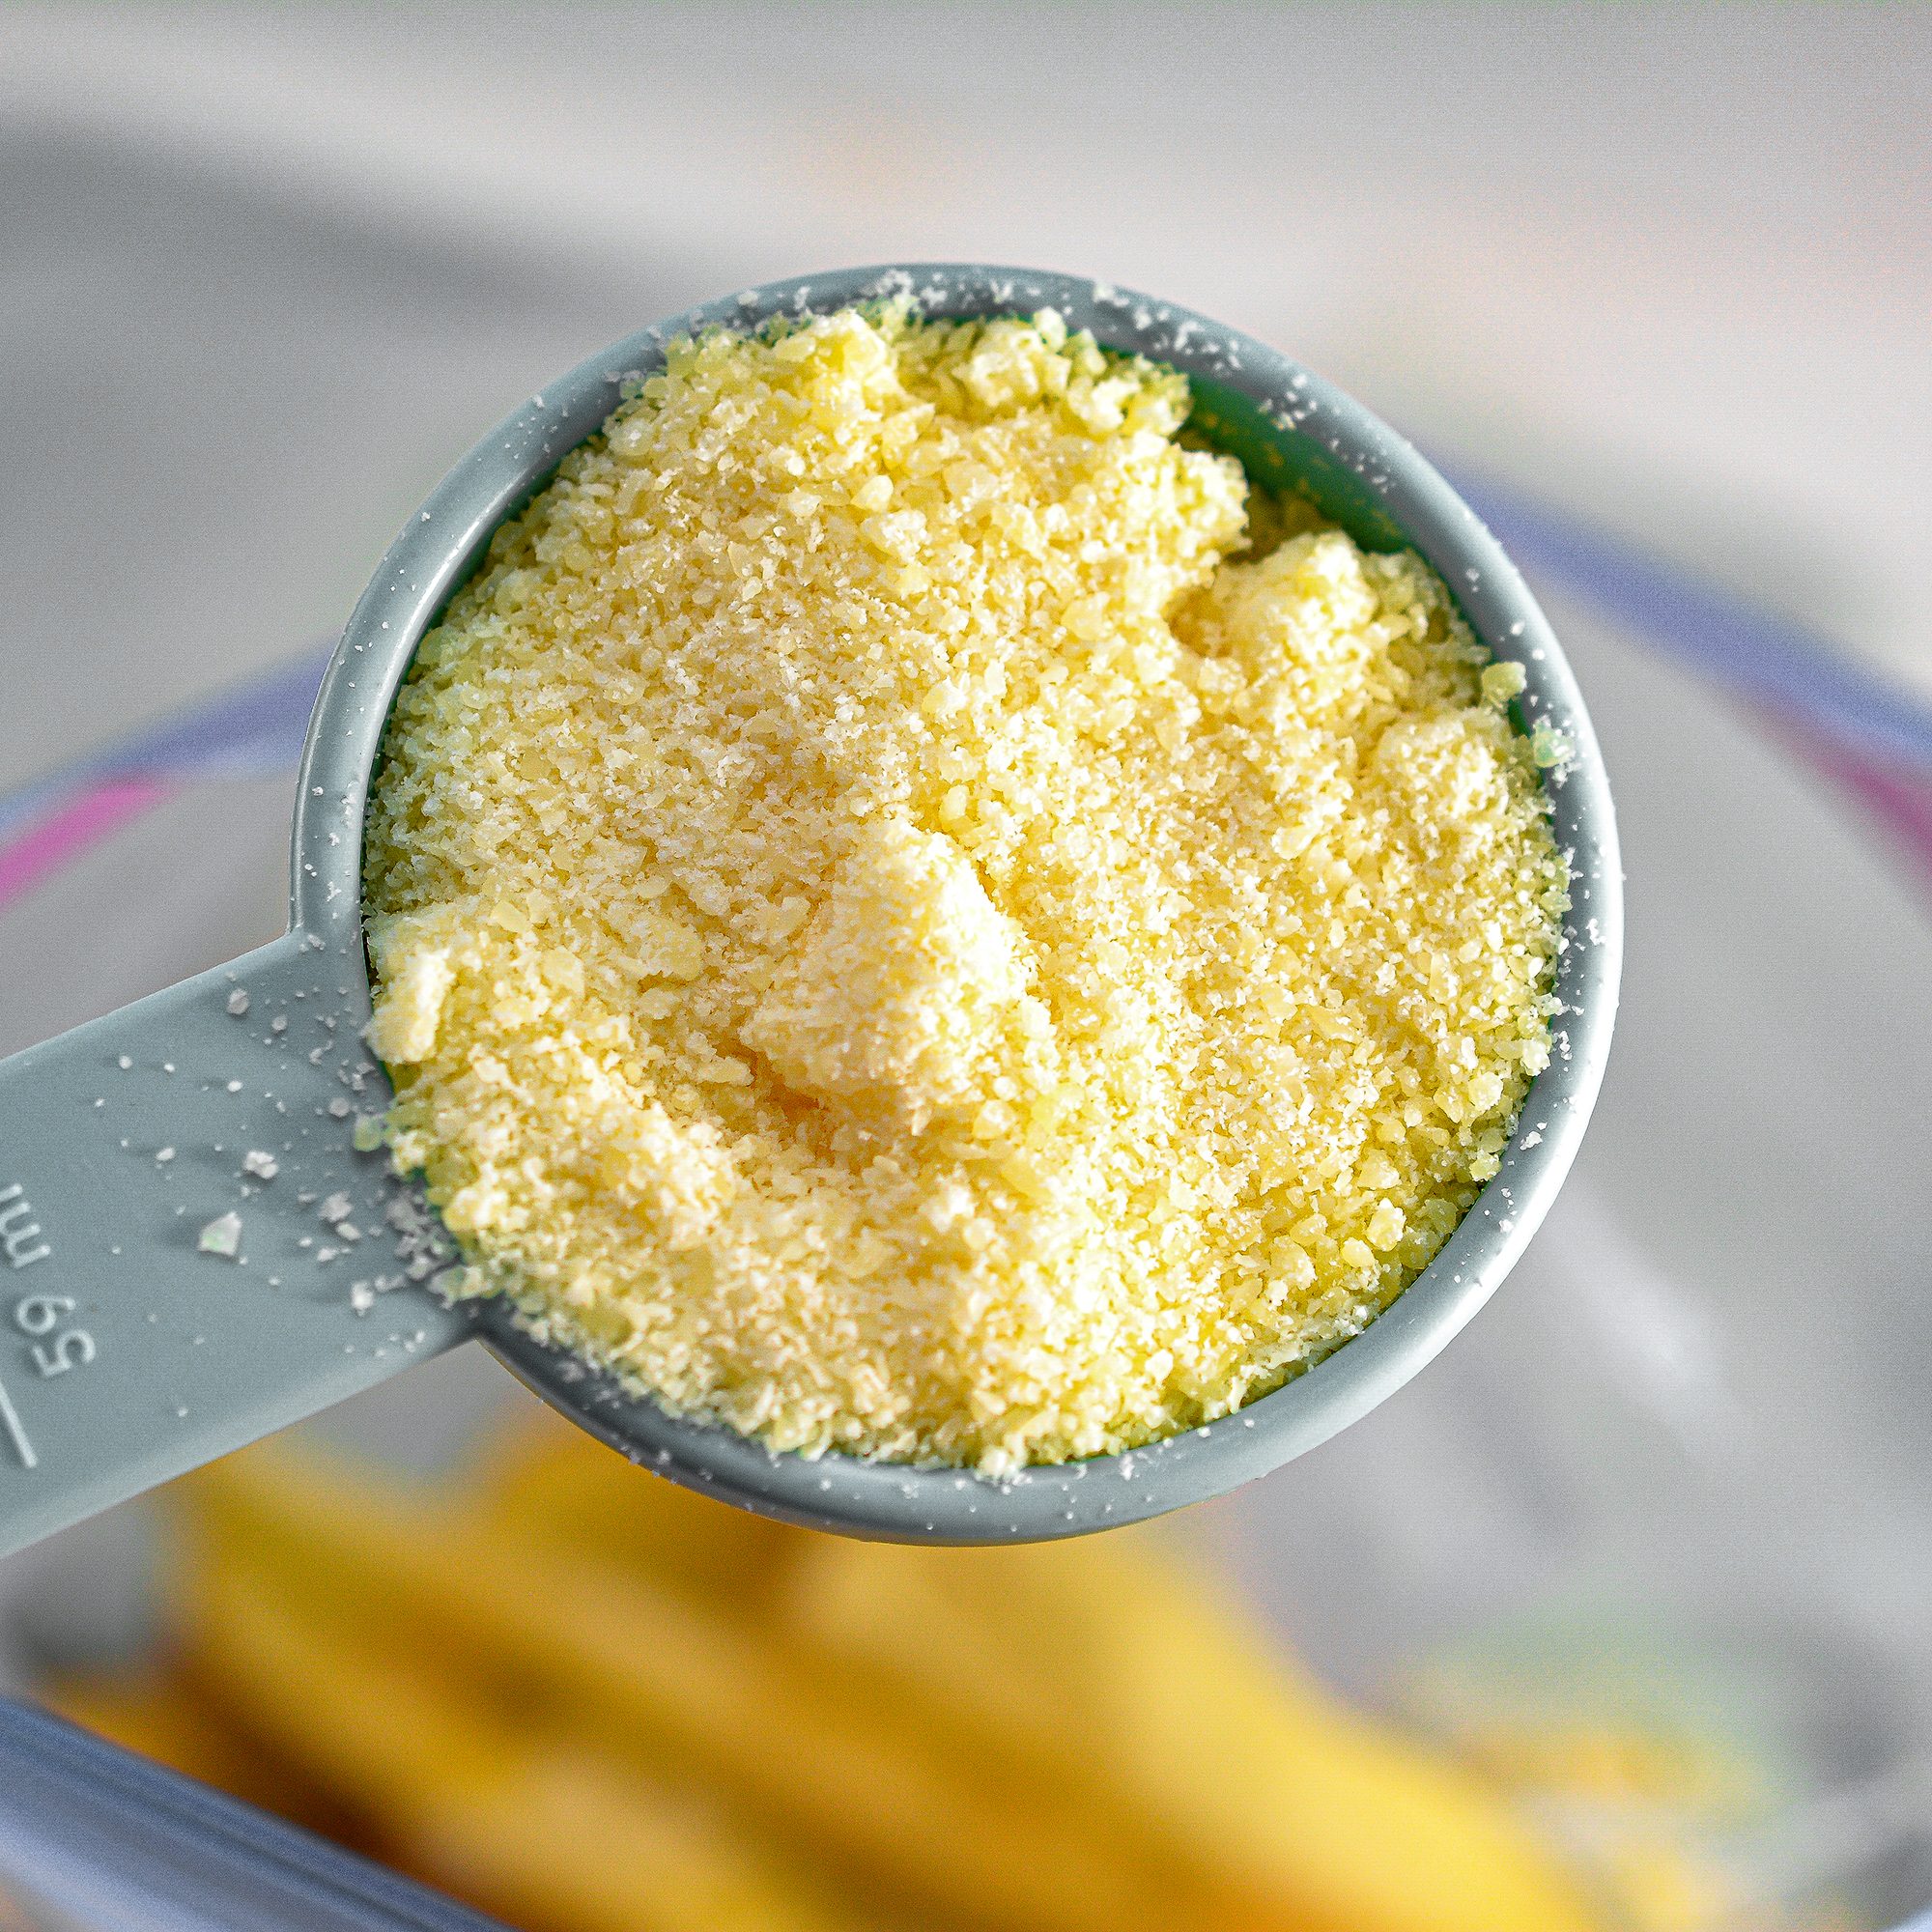  Adding Parmesan cheese grated